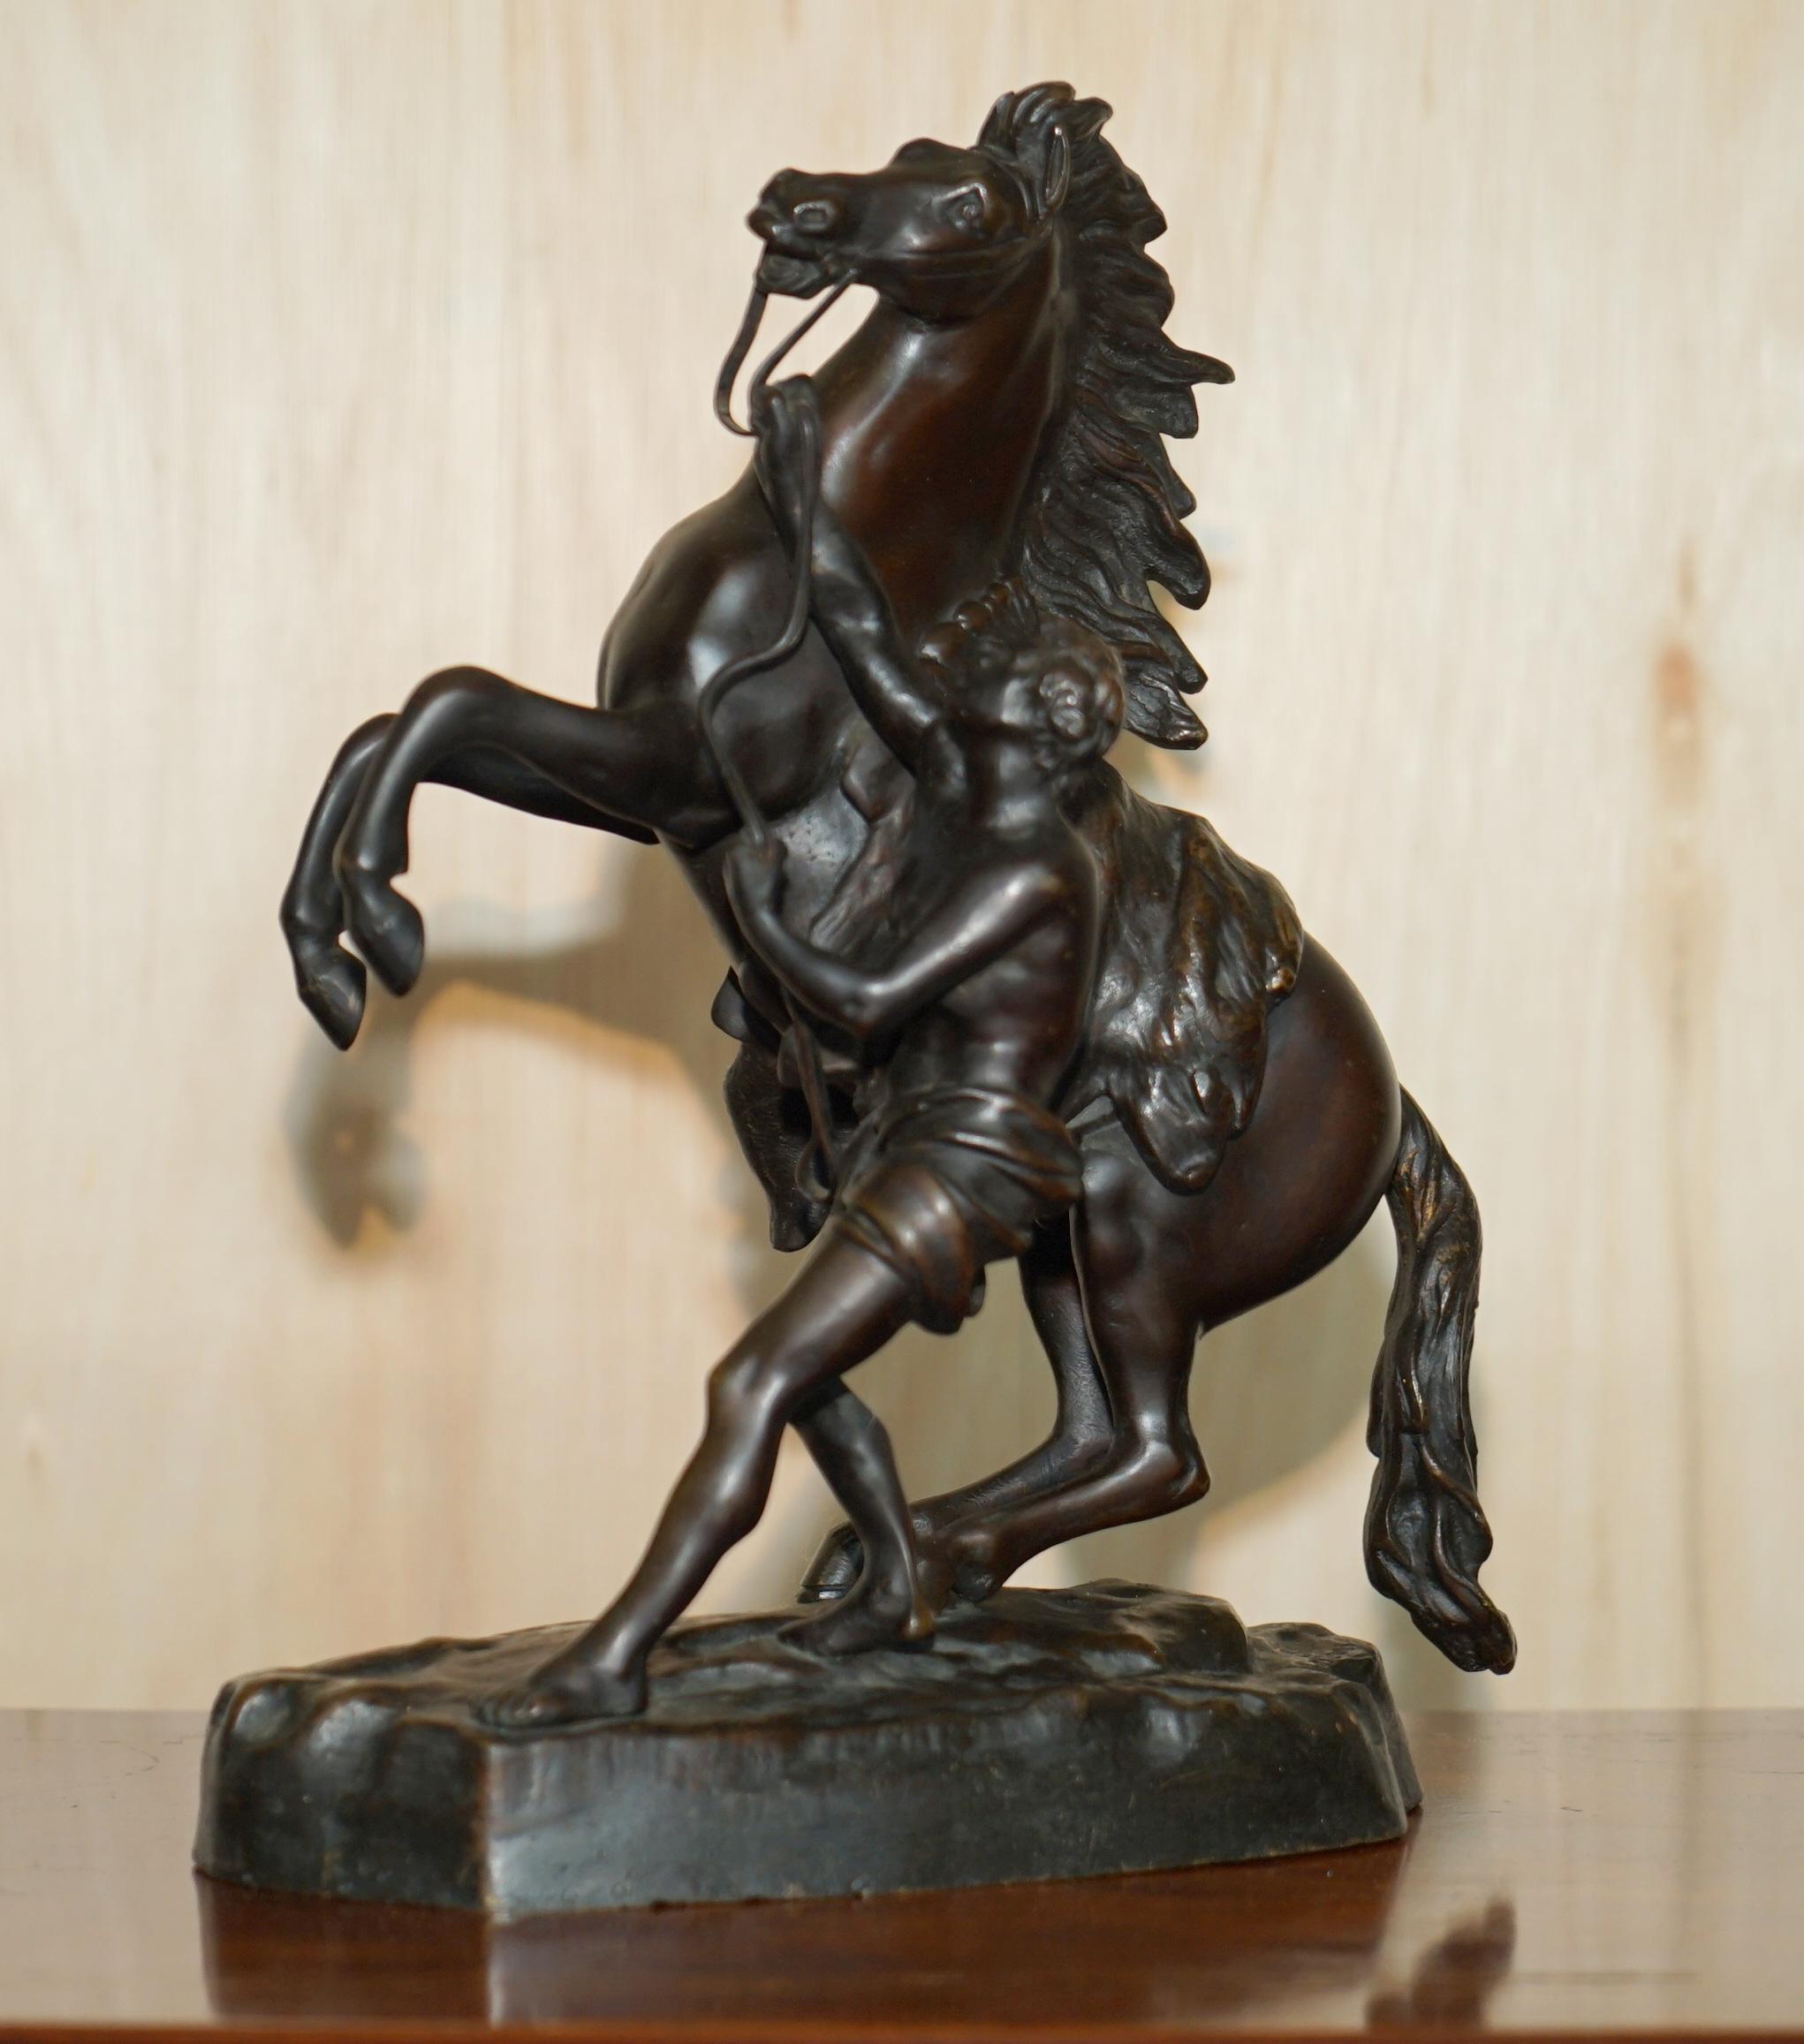 We are delighted to offer for sale this stunning pair of Guillaume Coustou bronze “Marly Horse” statues as seen in The Louvre Paris 

These are a very good looking and nicely executed pair, they are in solid bronze and have been wonderfully